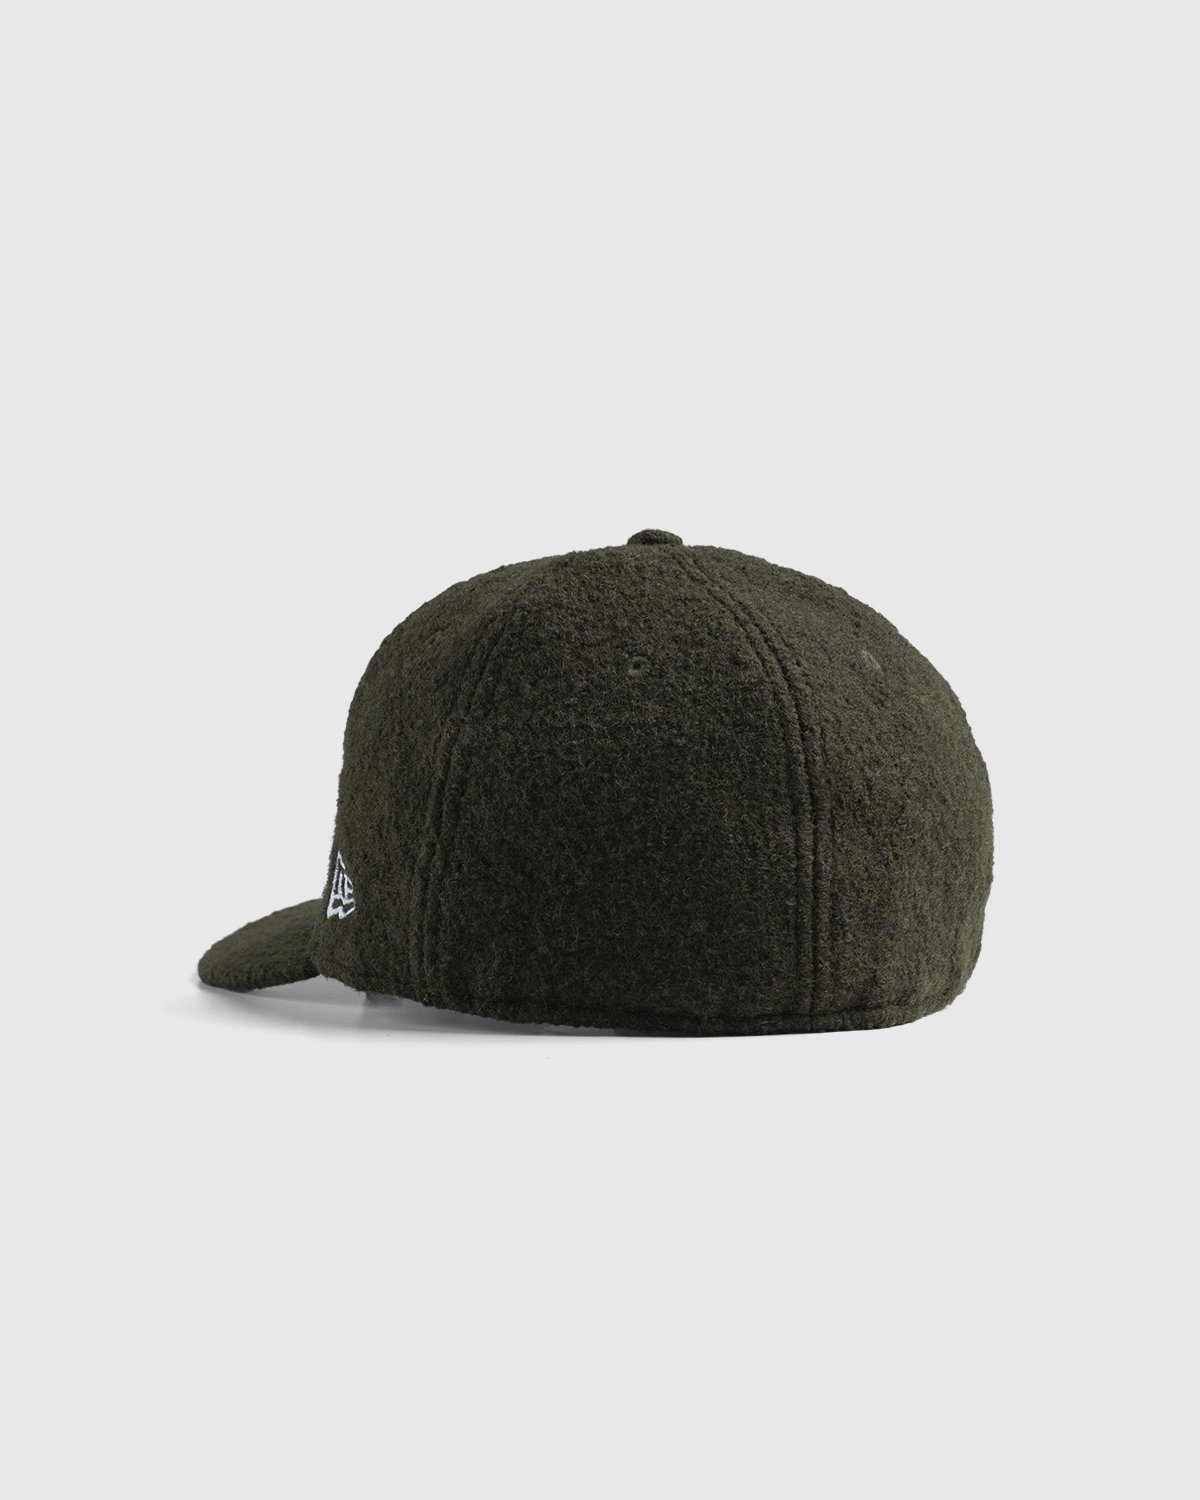 New Era x Highsnobiety - 59Fifty Forest Green - Accessories - Green - Image 3